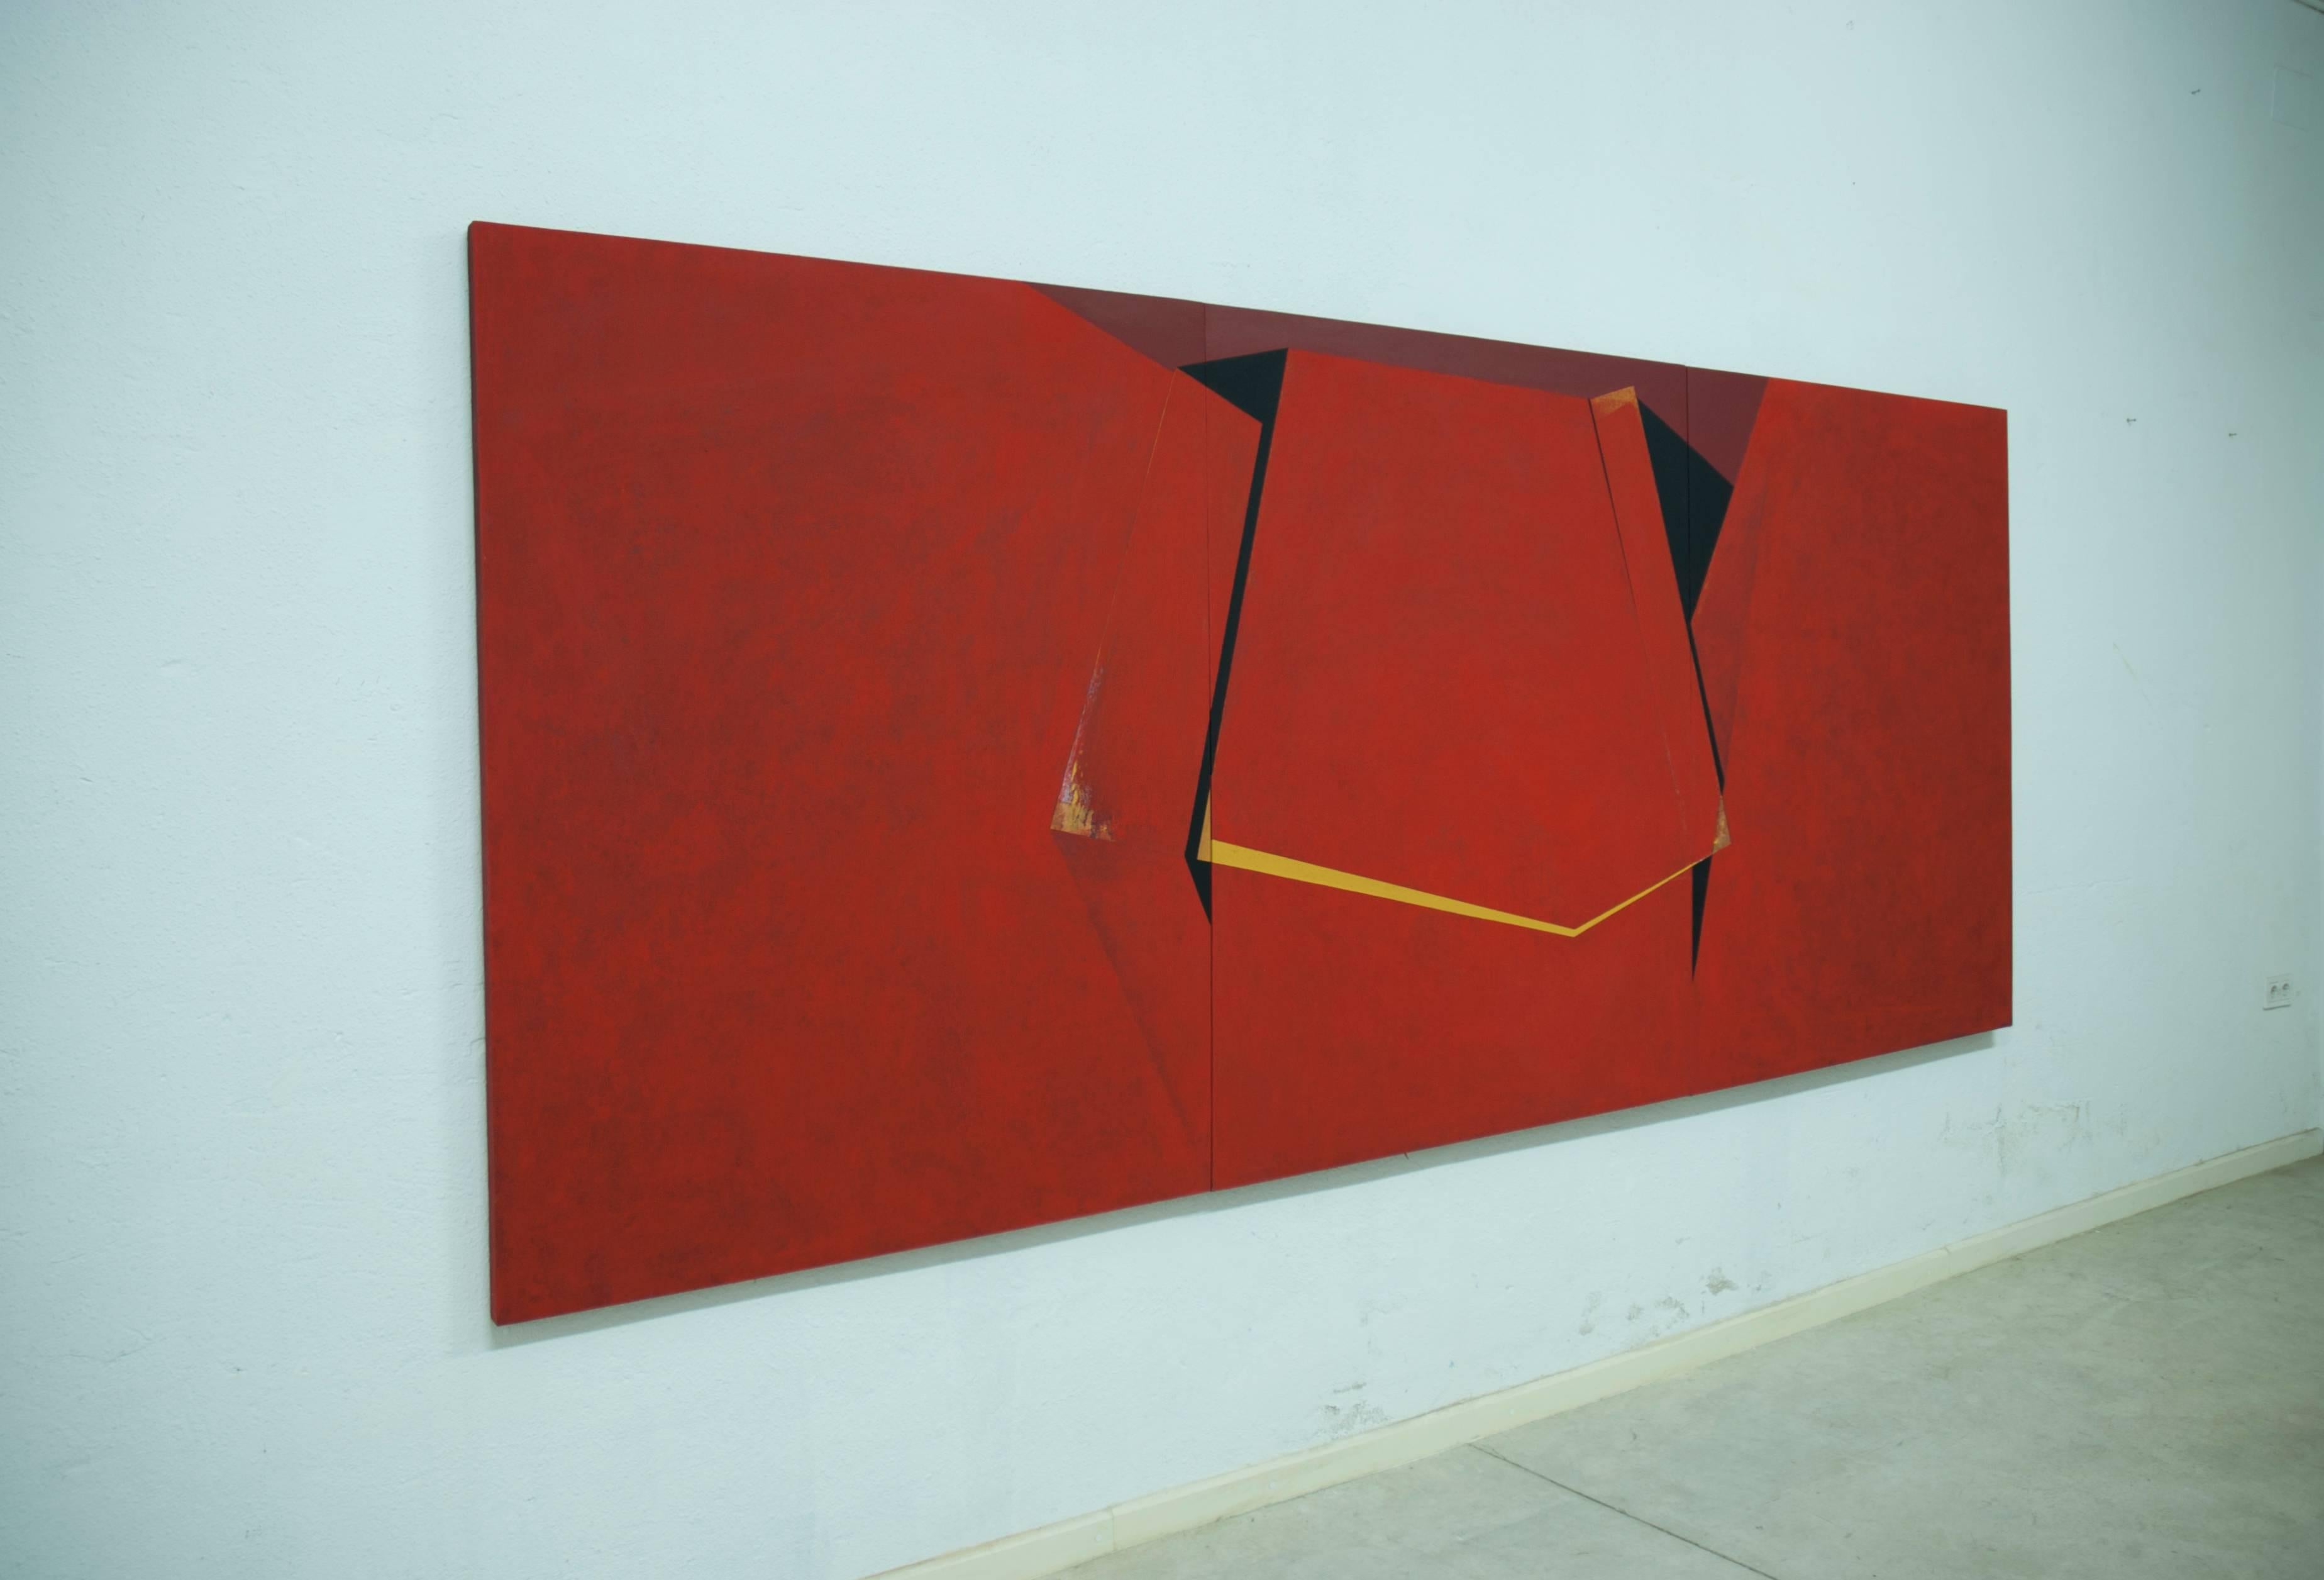 A través del rojo (Through the red), 2013, Mixed media on stretched canvas (triptych), 59 1/10 × 141 7/10 in; 150 × 360 cm

This painting is a triptych of three canvases, aligned to form one complete painting, making handling and shipping